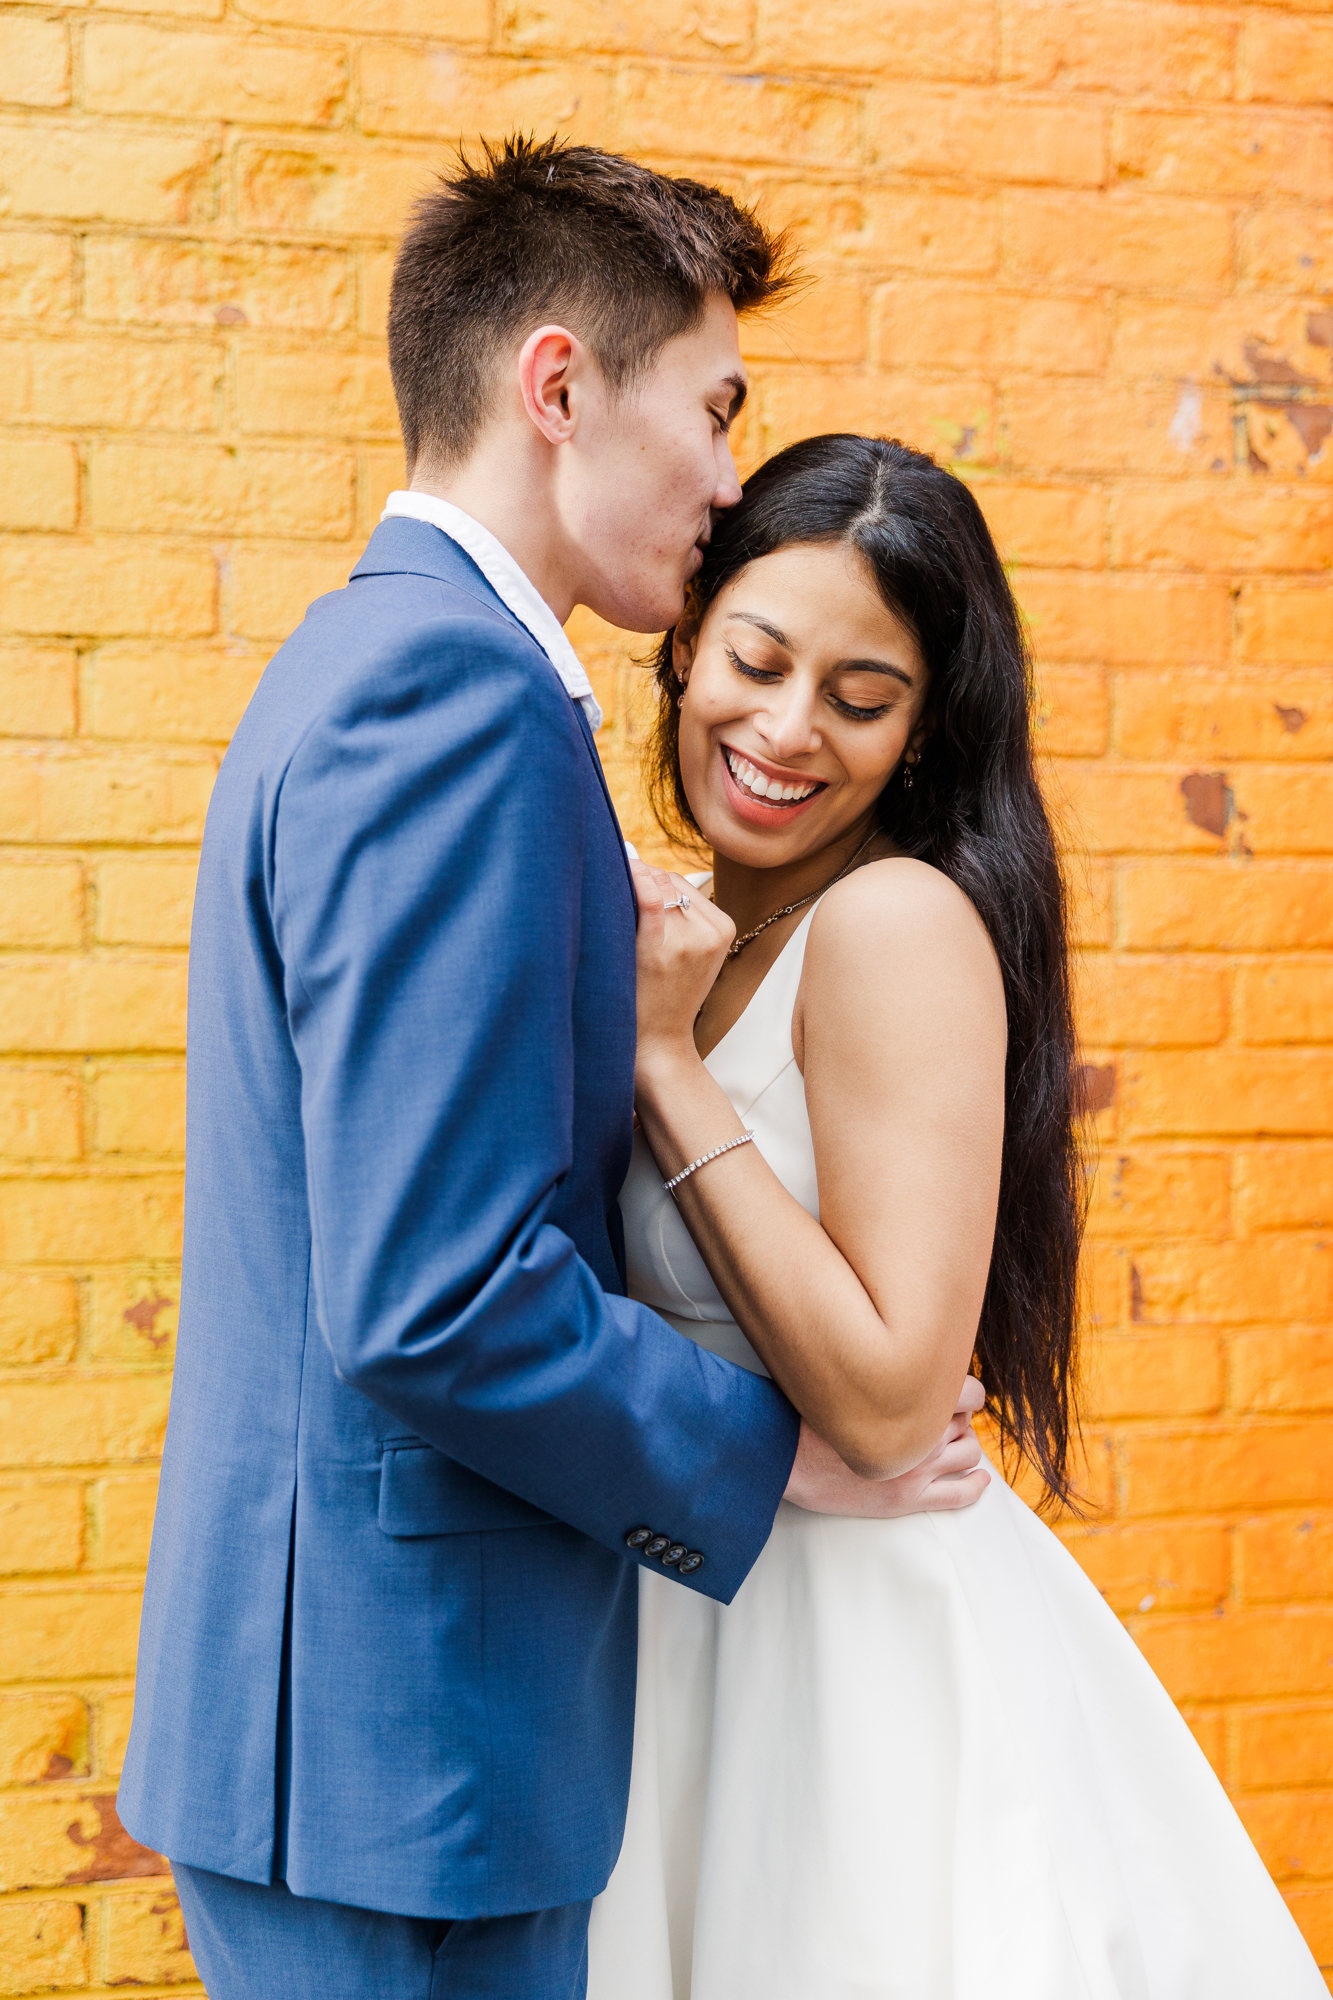 Gorgeous Spring Engagement Photography in DUMBO